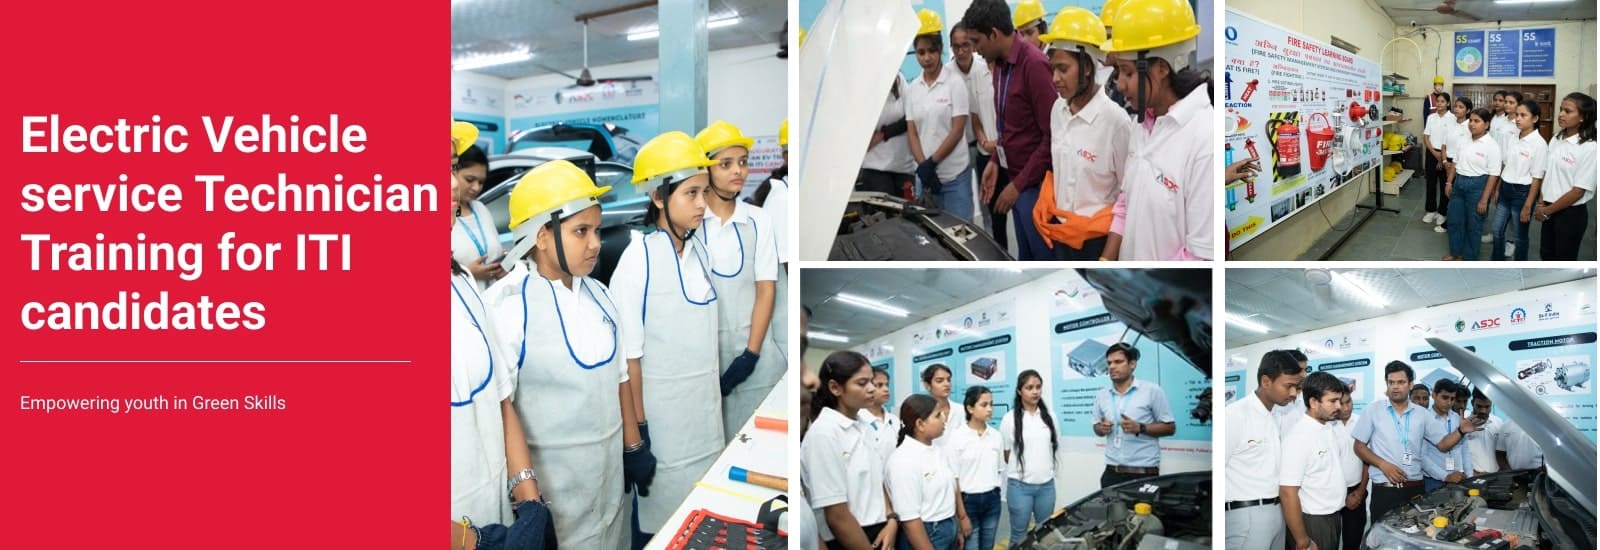 Electric vehicle services technician training ITI candidates